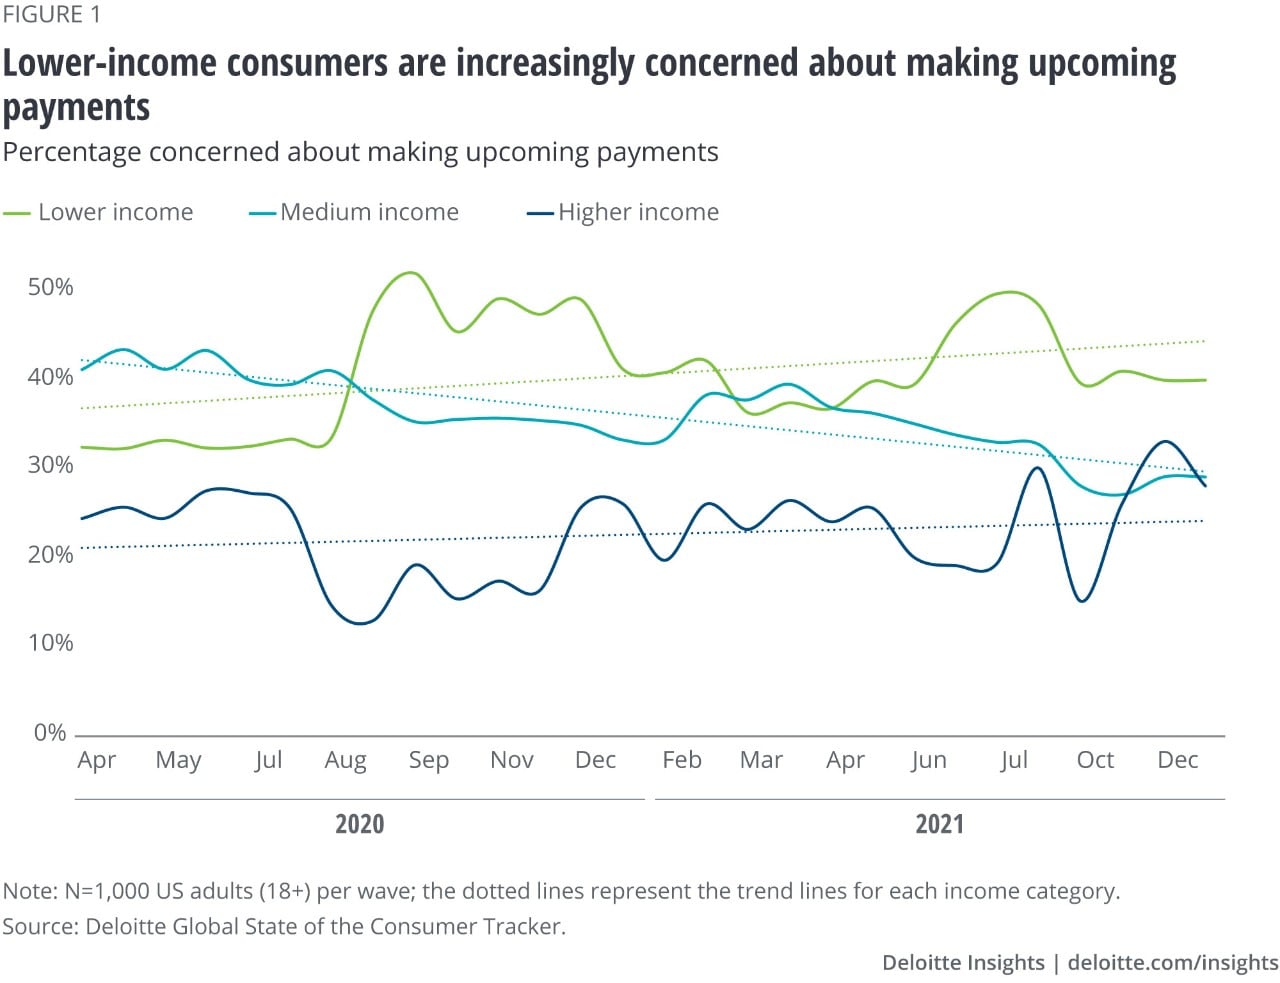 Figure 1. Percentage concerned about making upcoming payments